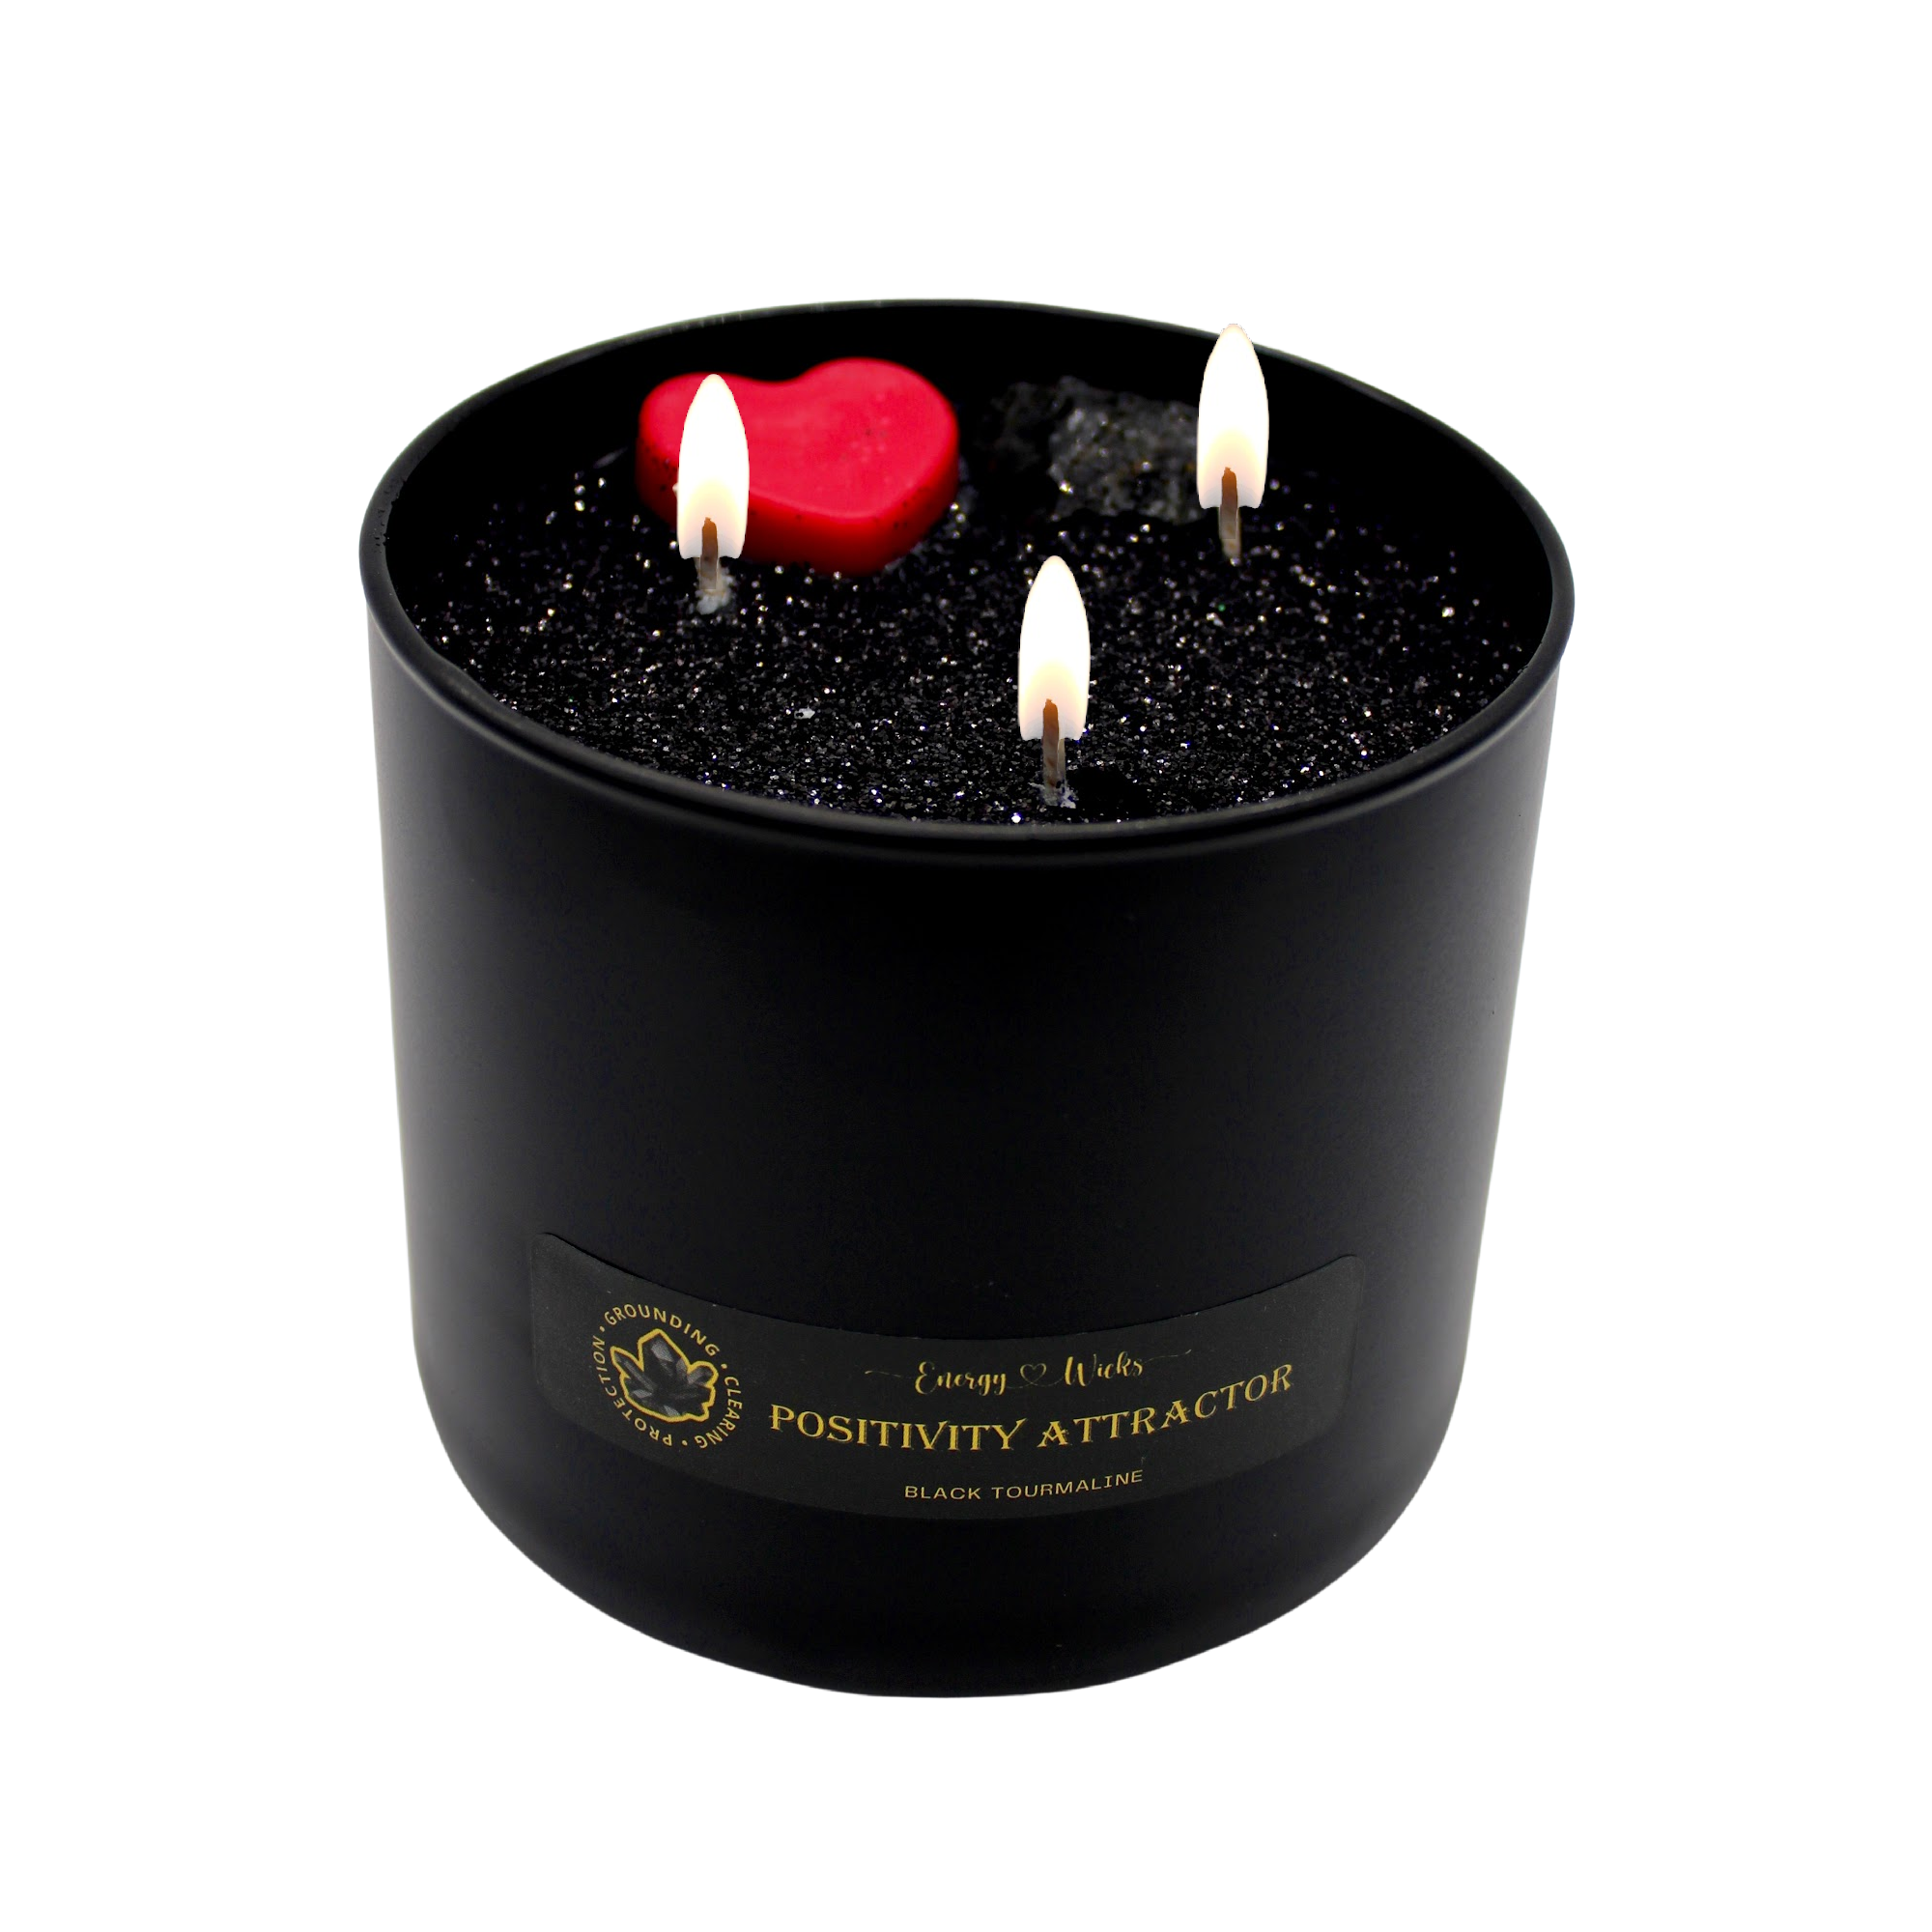 Positivity Attractor 3 Wick Candle - Energy Wicks